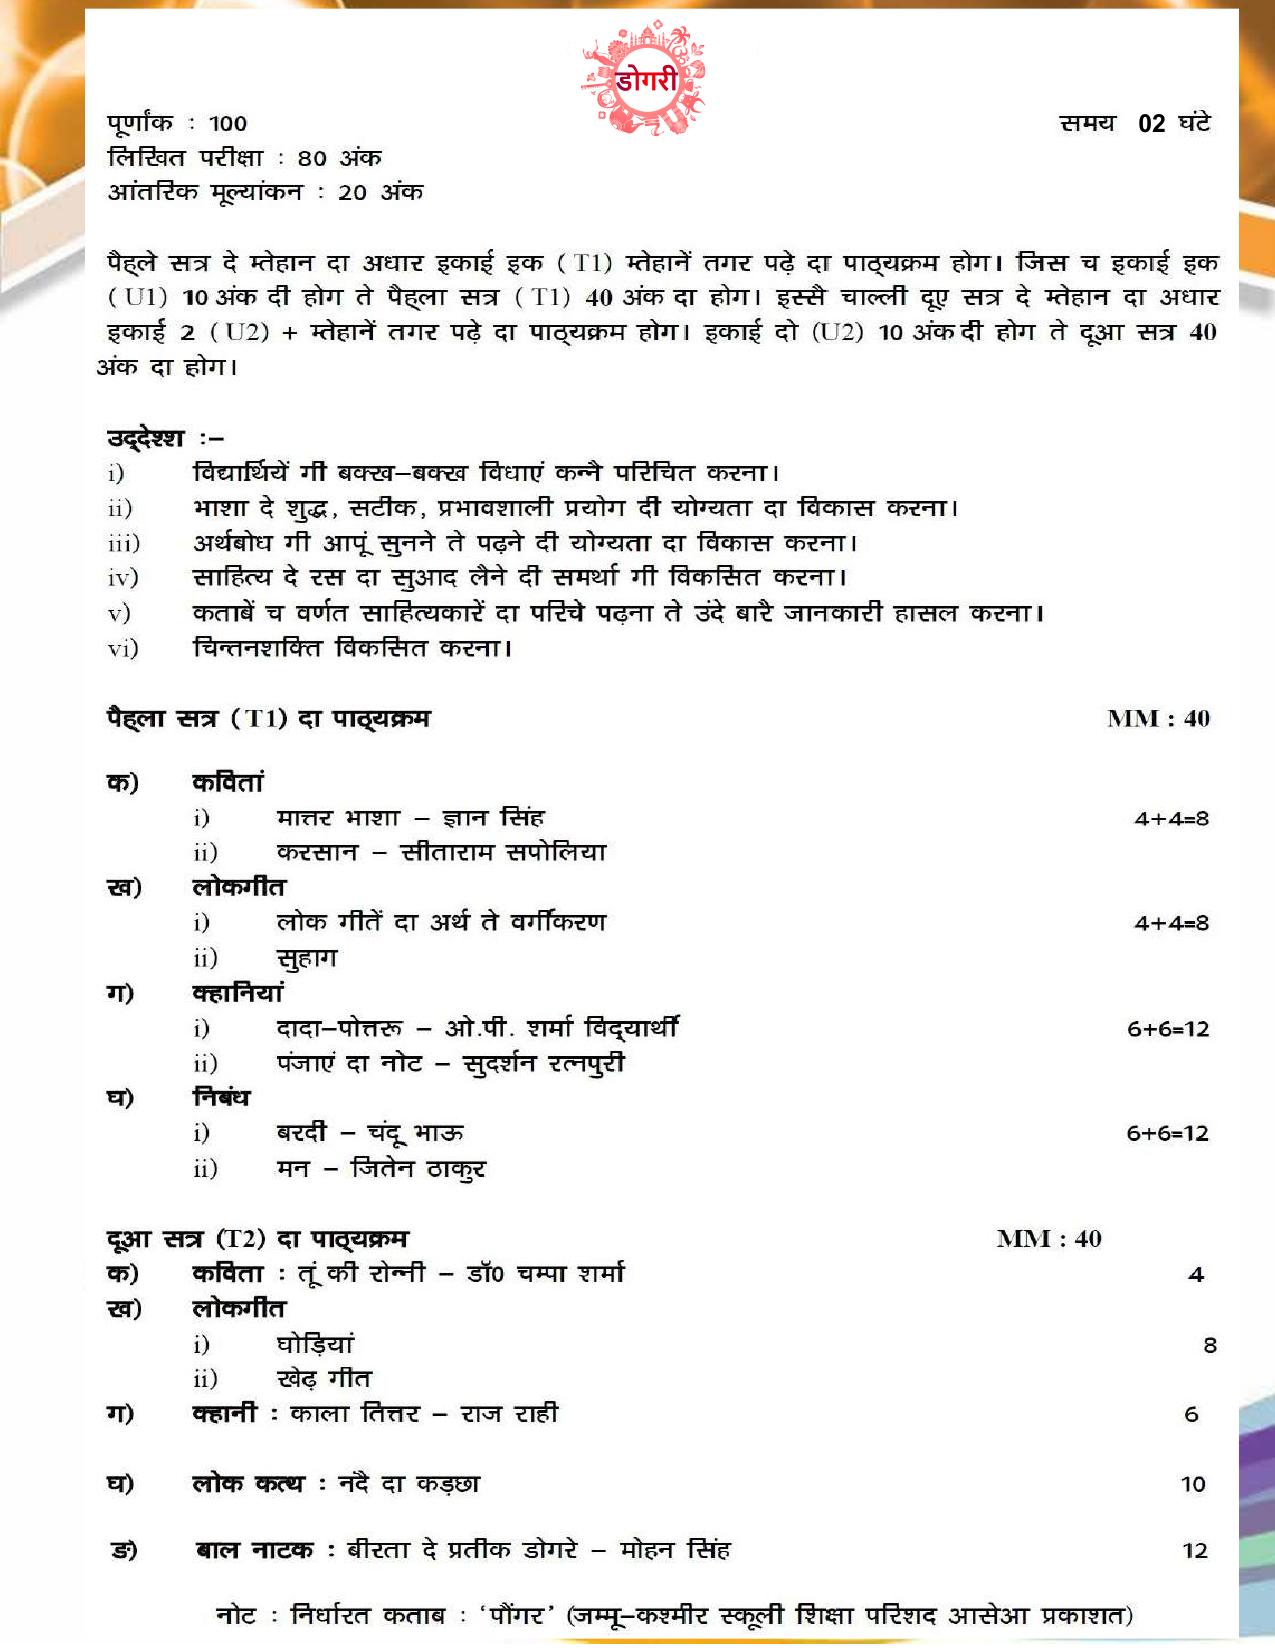 JKBOSE Syllabus for 9th class - Page 54